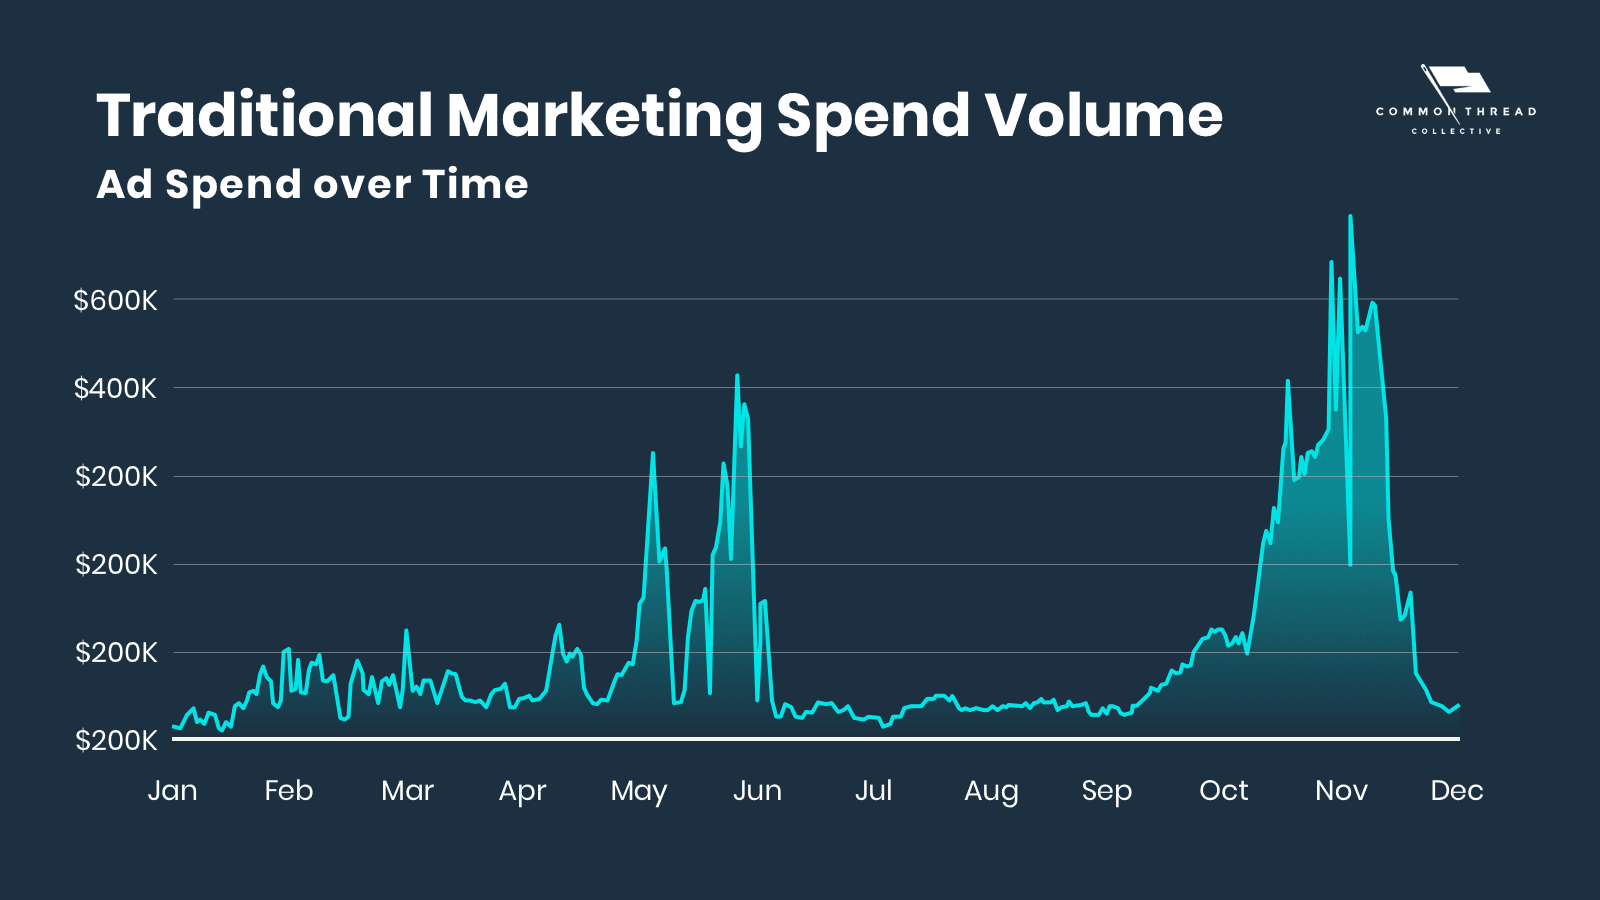 traditional marketing ad spend volume over time for ecommerce businesses